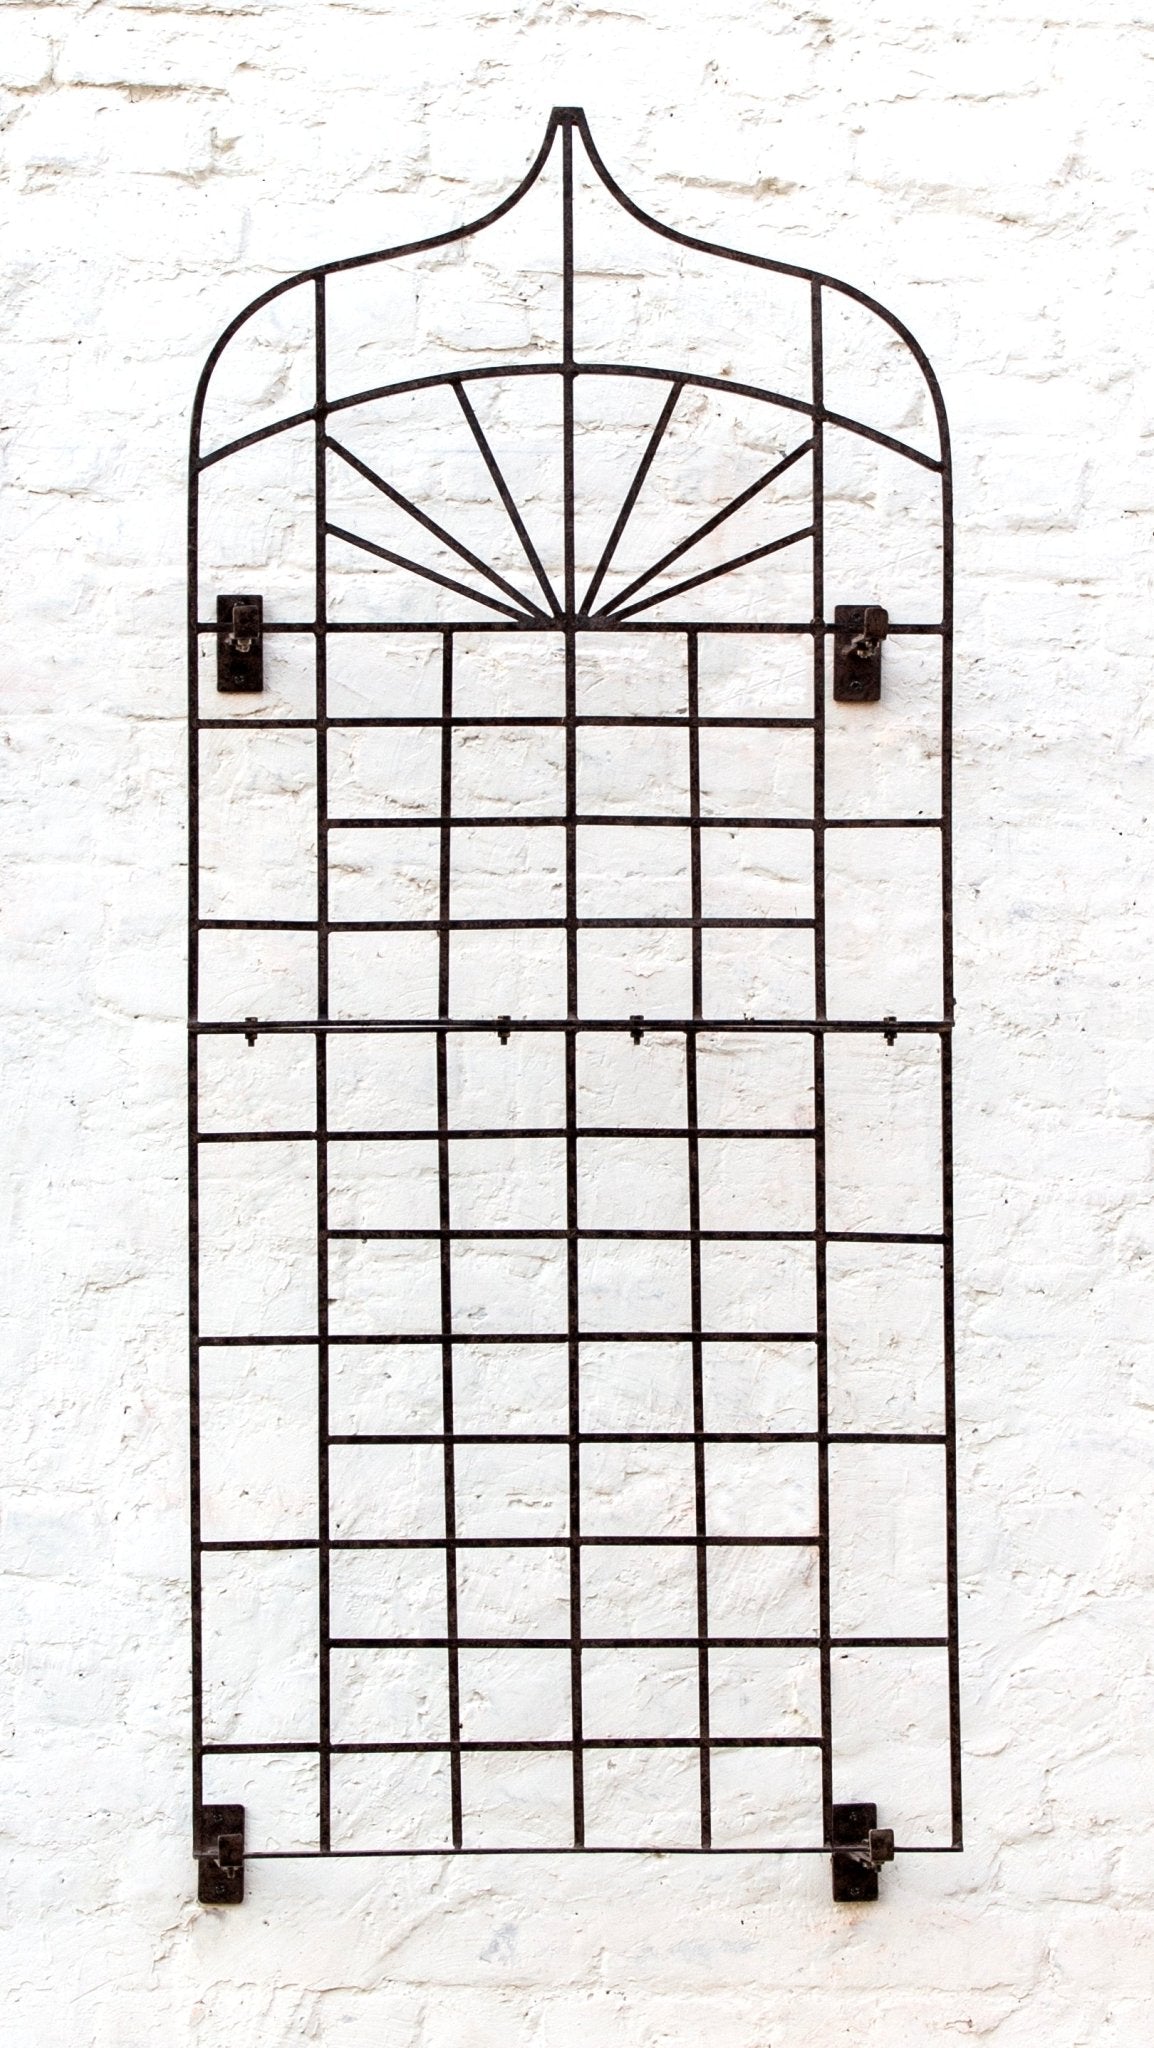 hanging iron garden trellis for outdoor walls H Potter H Potter Wall Trellis trellises metal garden Outdoor Decor screen wrought iron vine ivy pot  rose patio wire tomato wedding planter decoration small vegetable lattice large privacy Moroccan scroll flower tall spiral